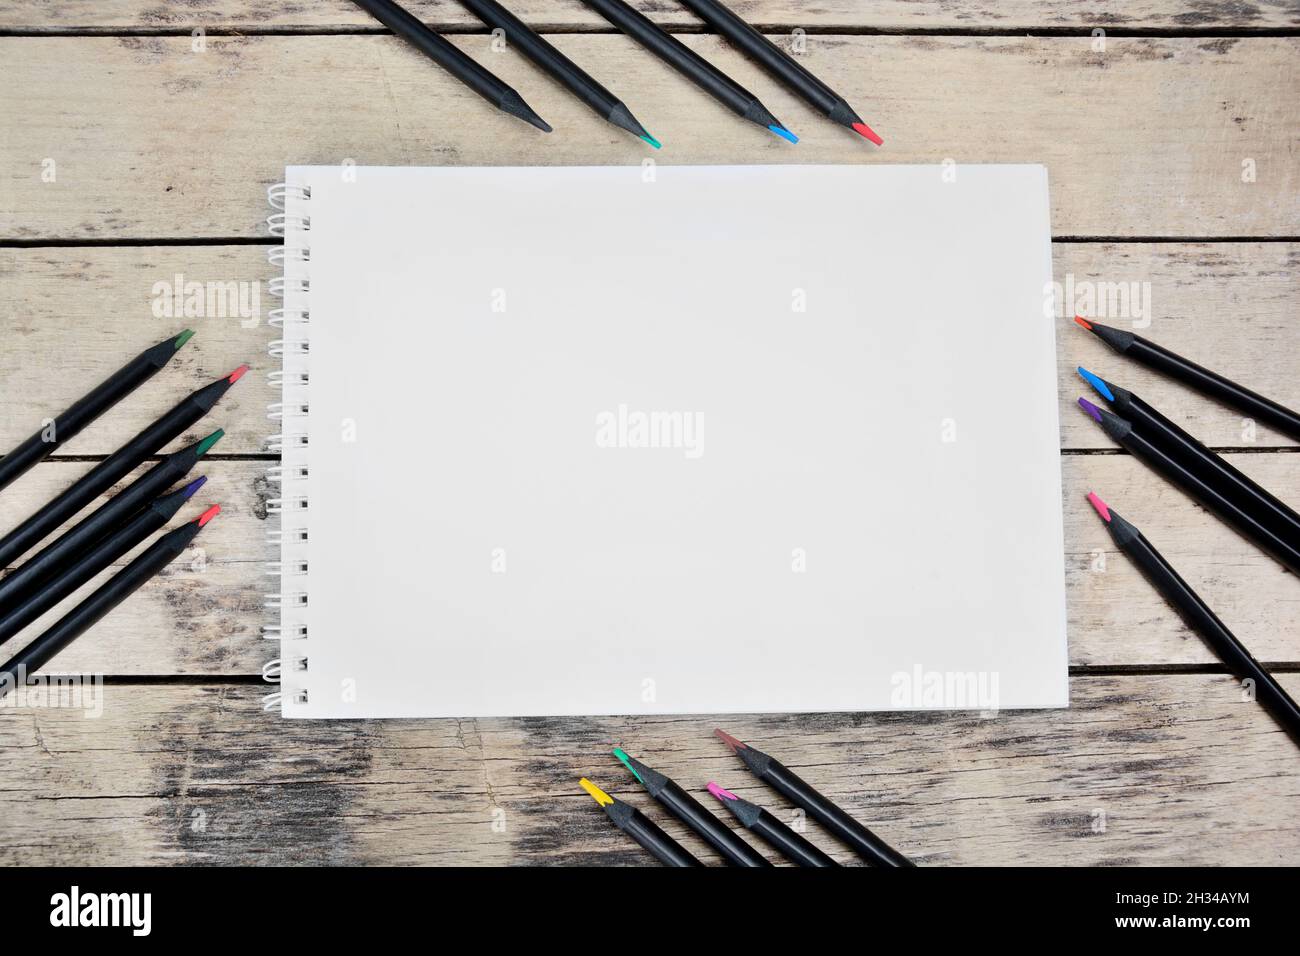 Empty notebook with black colorul pencils on desk Stock Photo